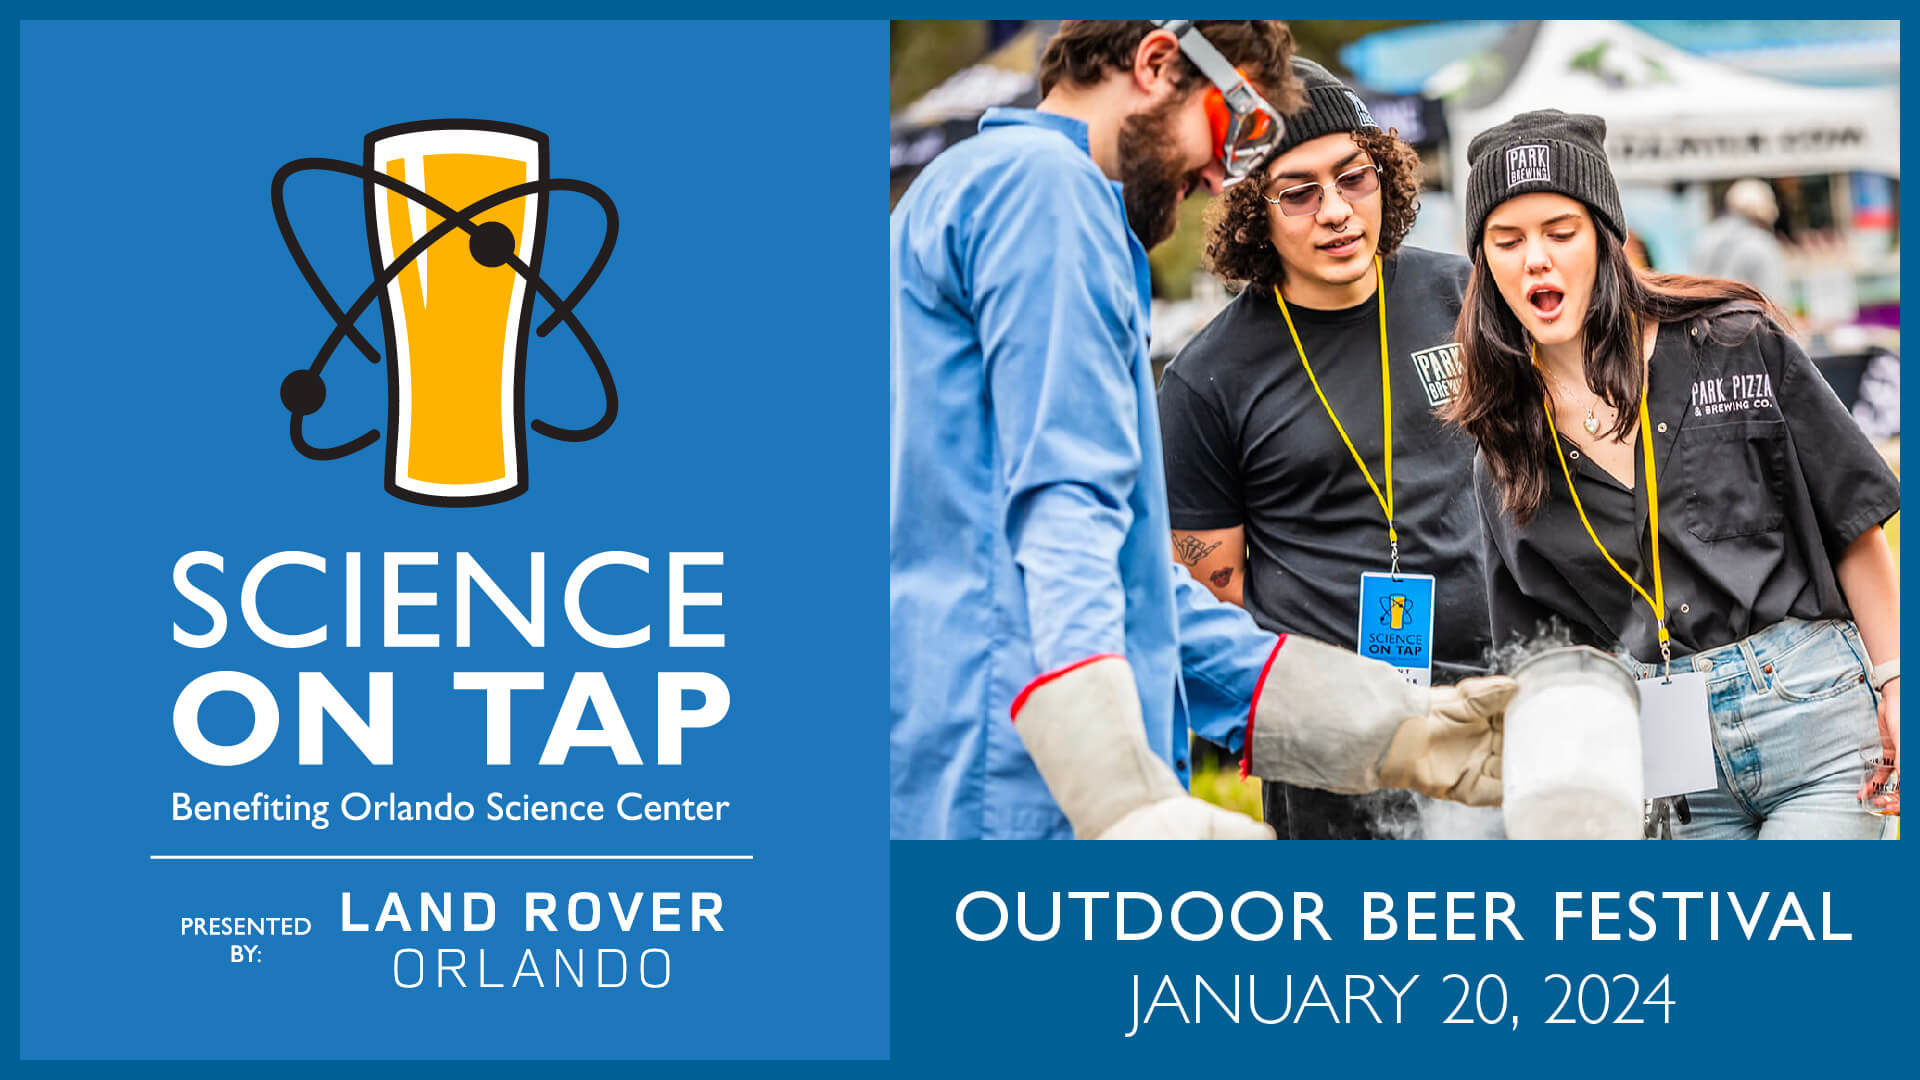 Science On Tap Sponsored by Land Rover Orlando - Outdoor Beer Festival January 20, 2024.